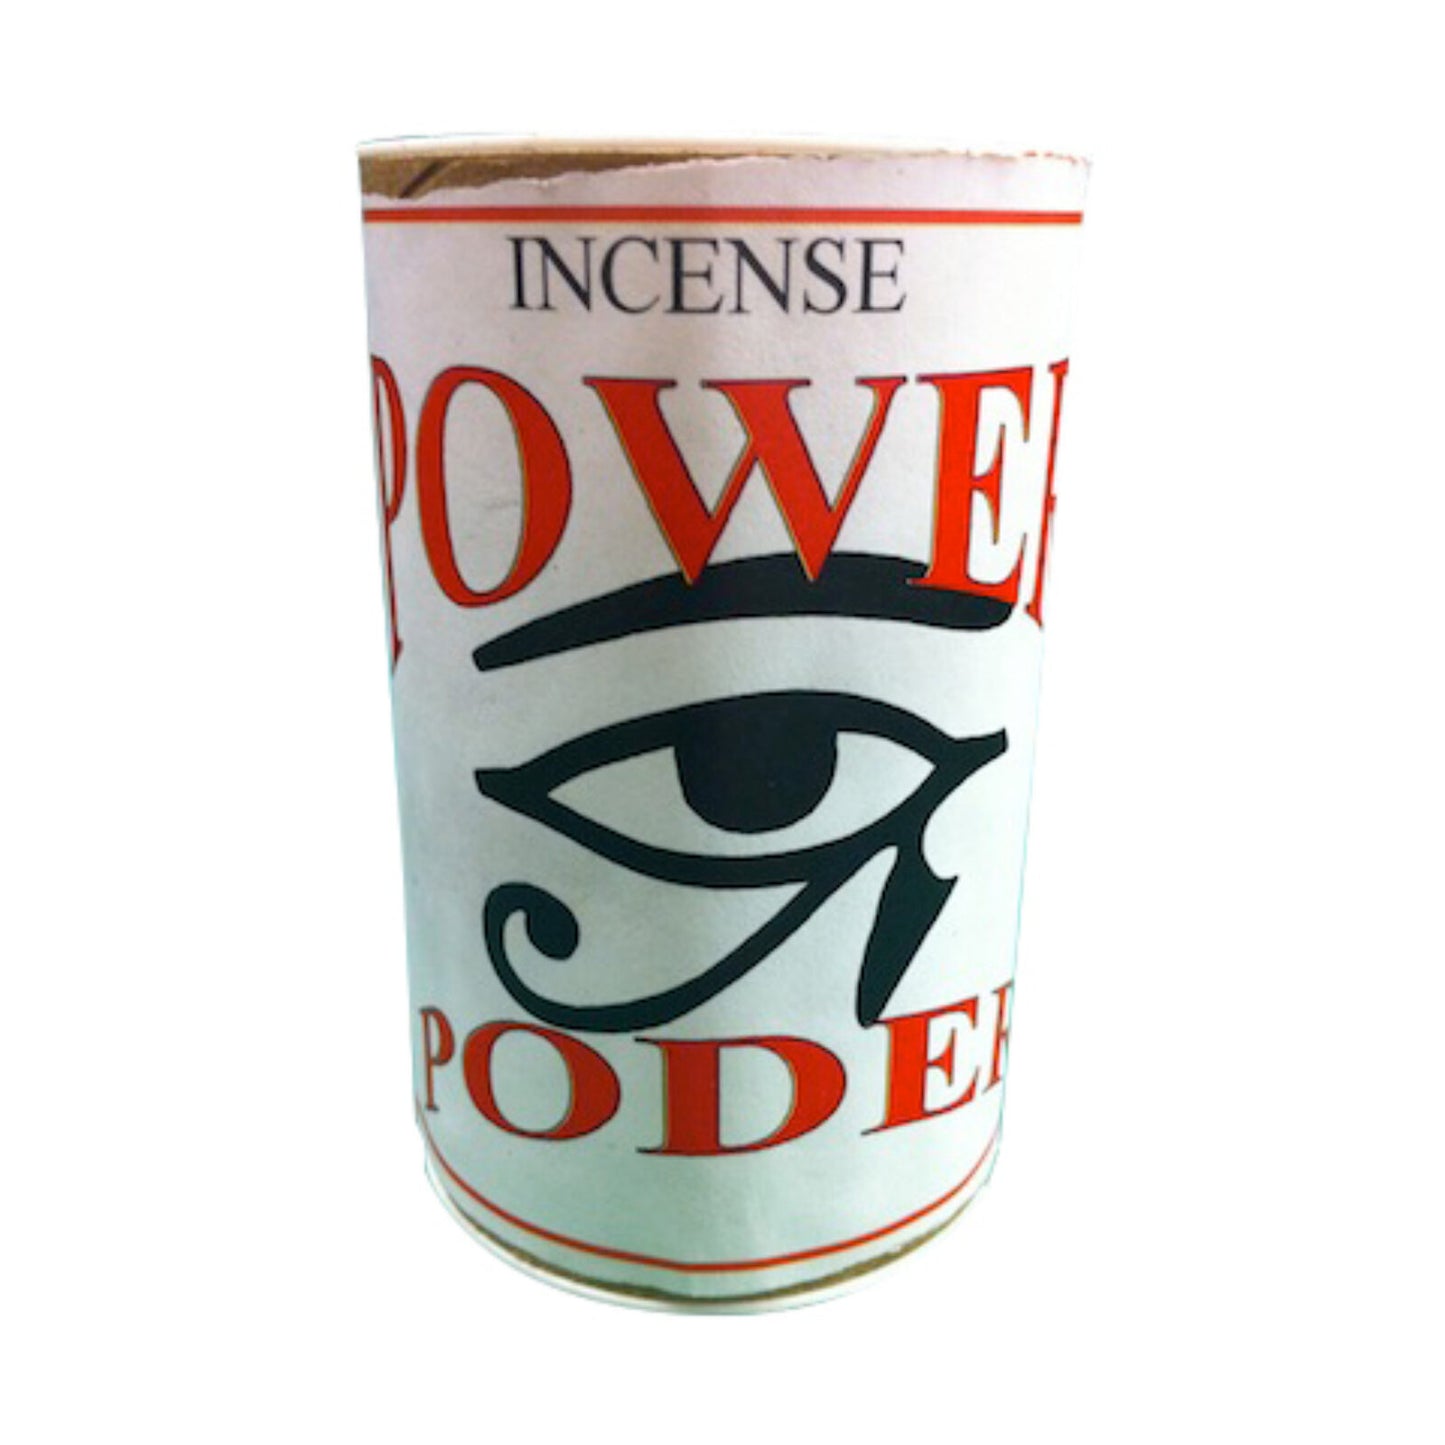 Power Incense Powder-Psychic Conjure